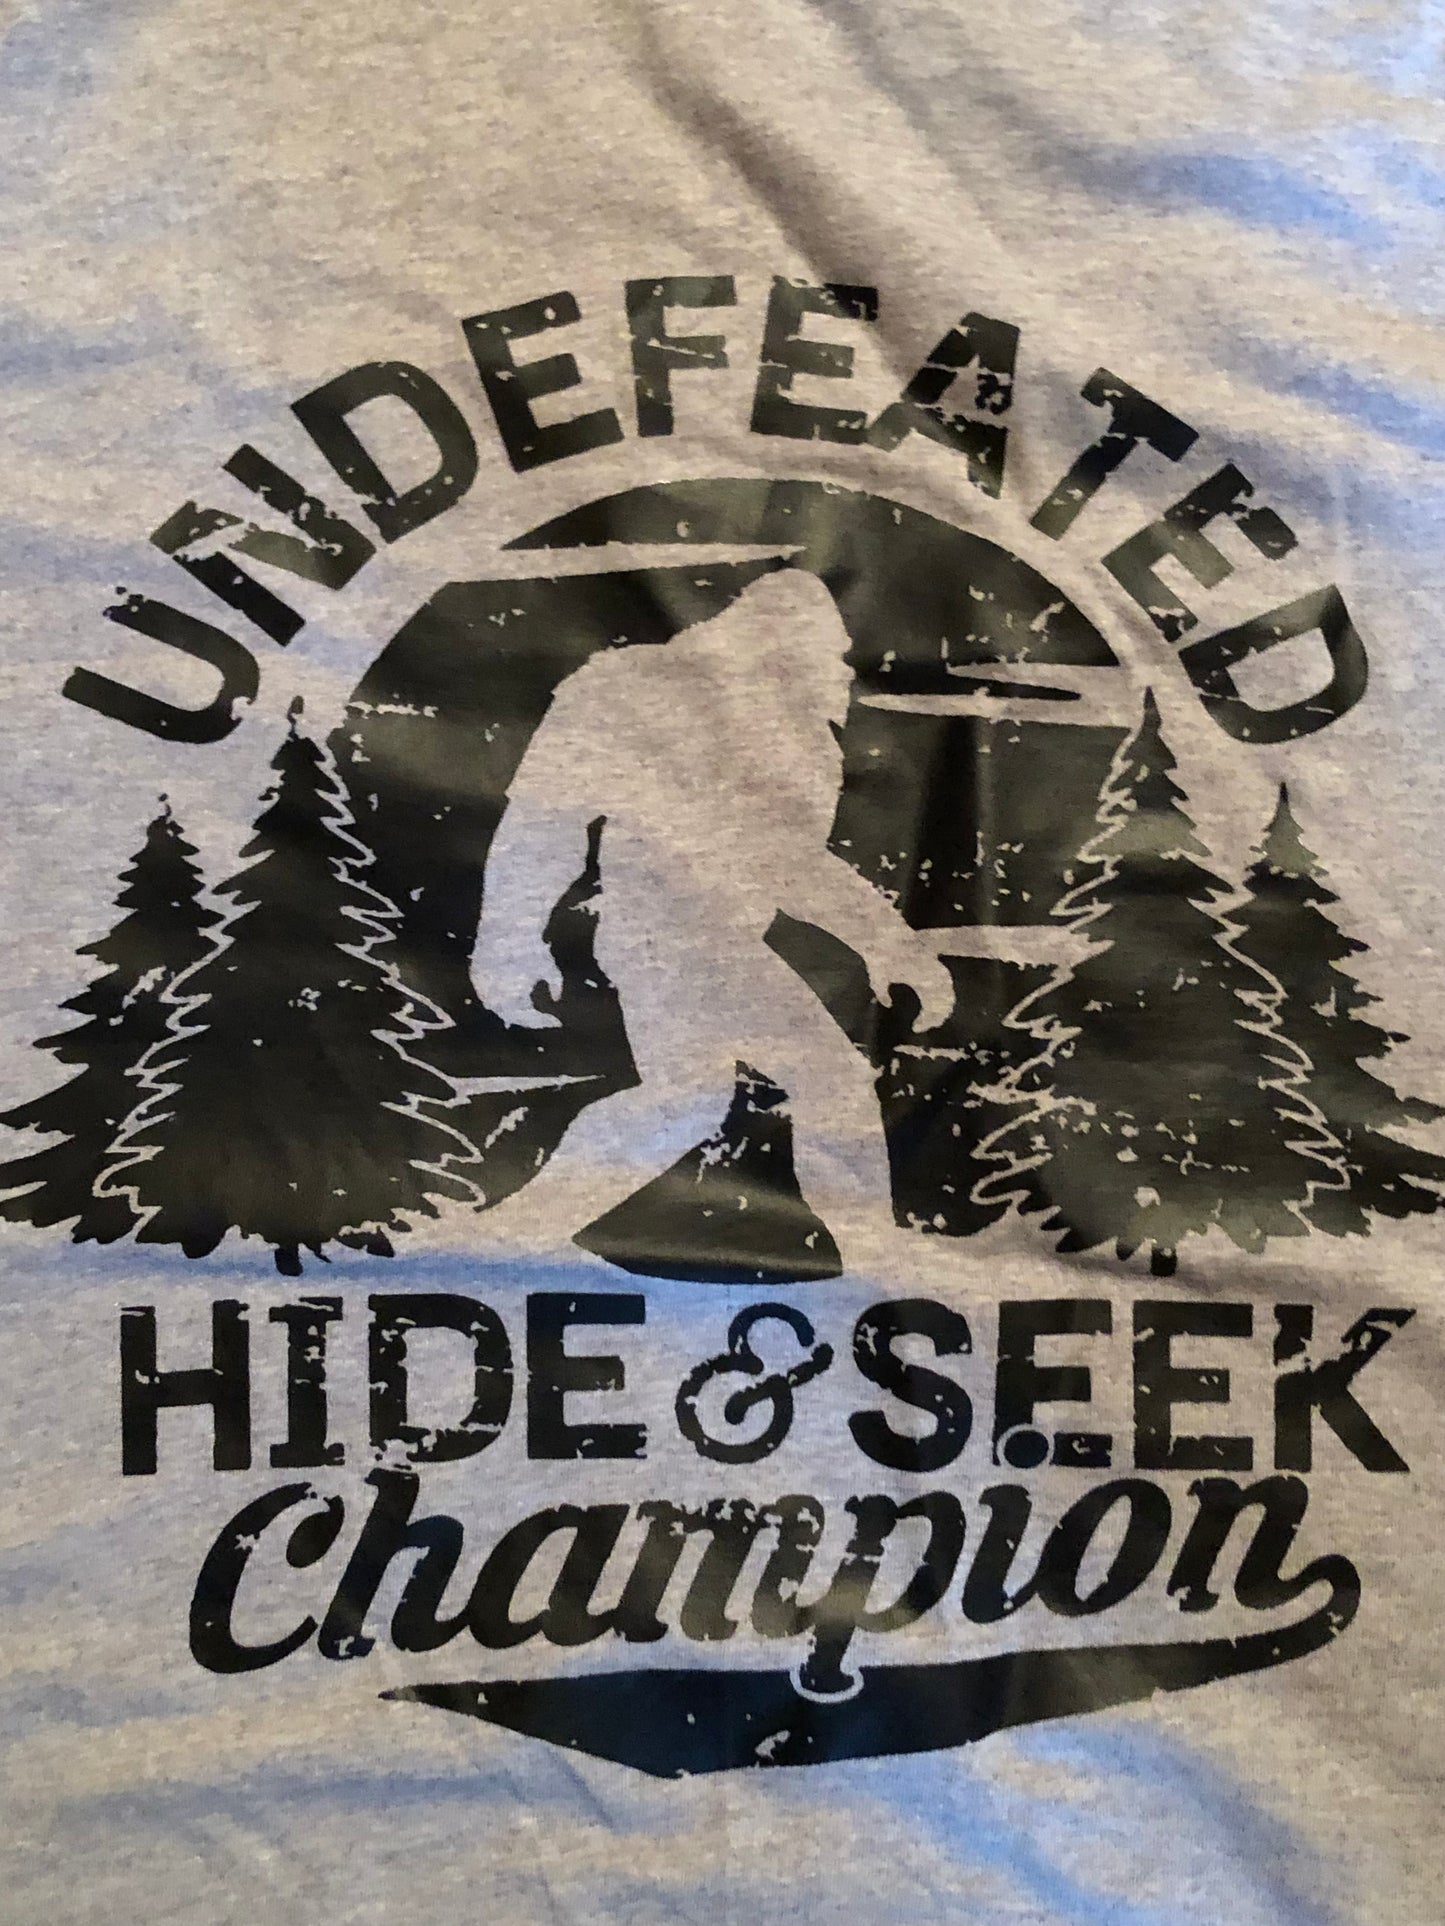 Undefeated Hide and Seek Champion Big Foot Sasquatch t-shirt